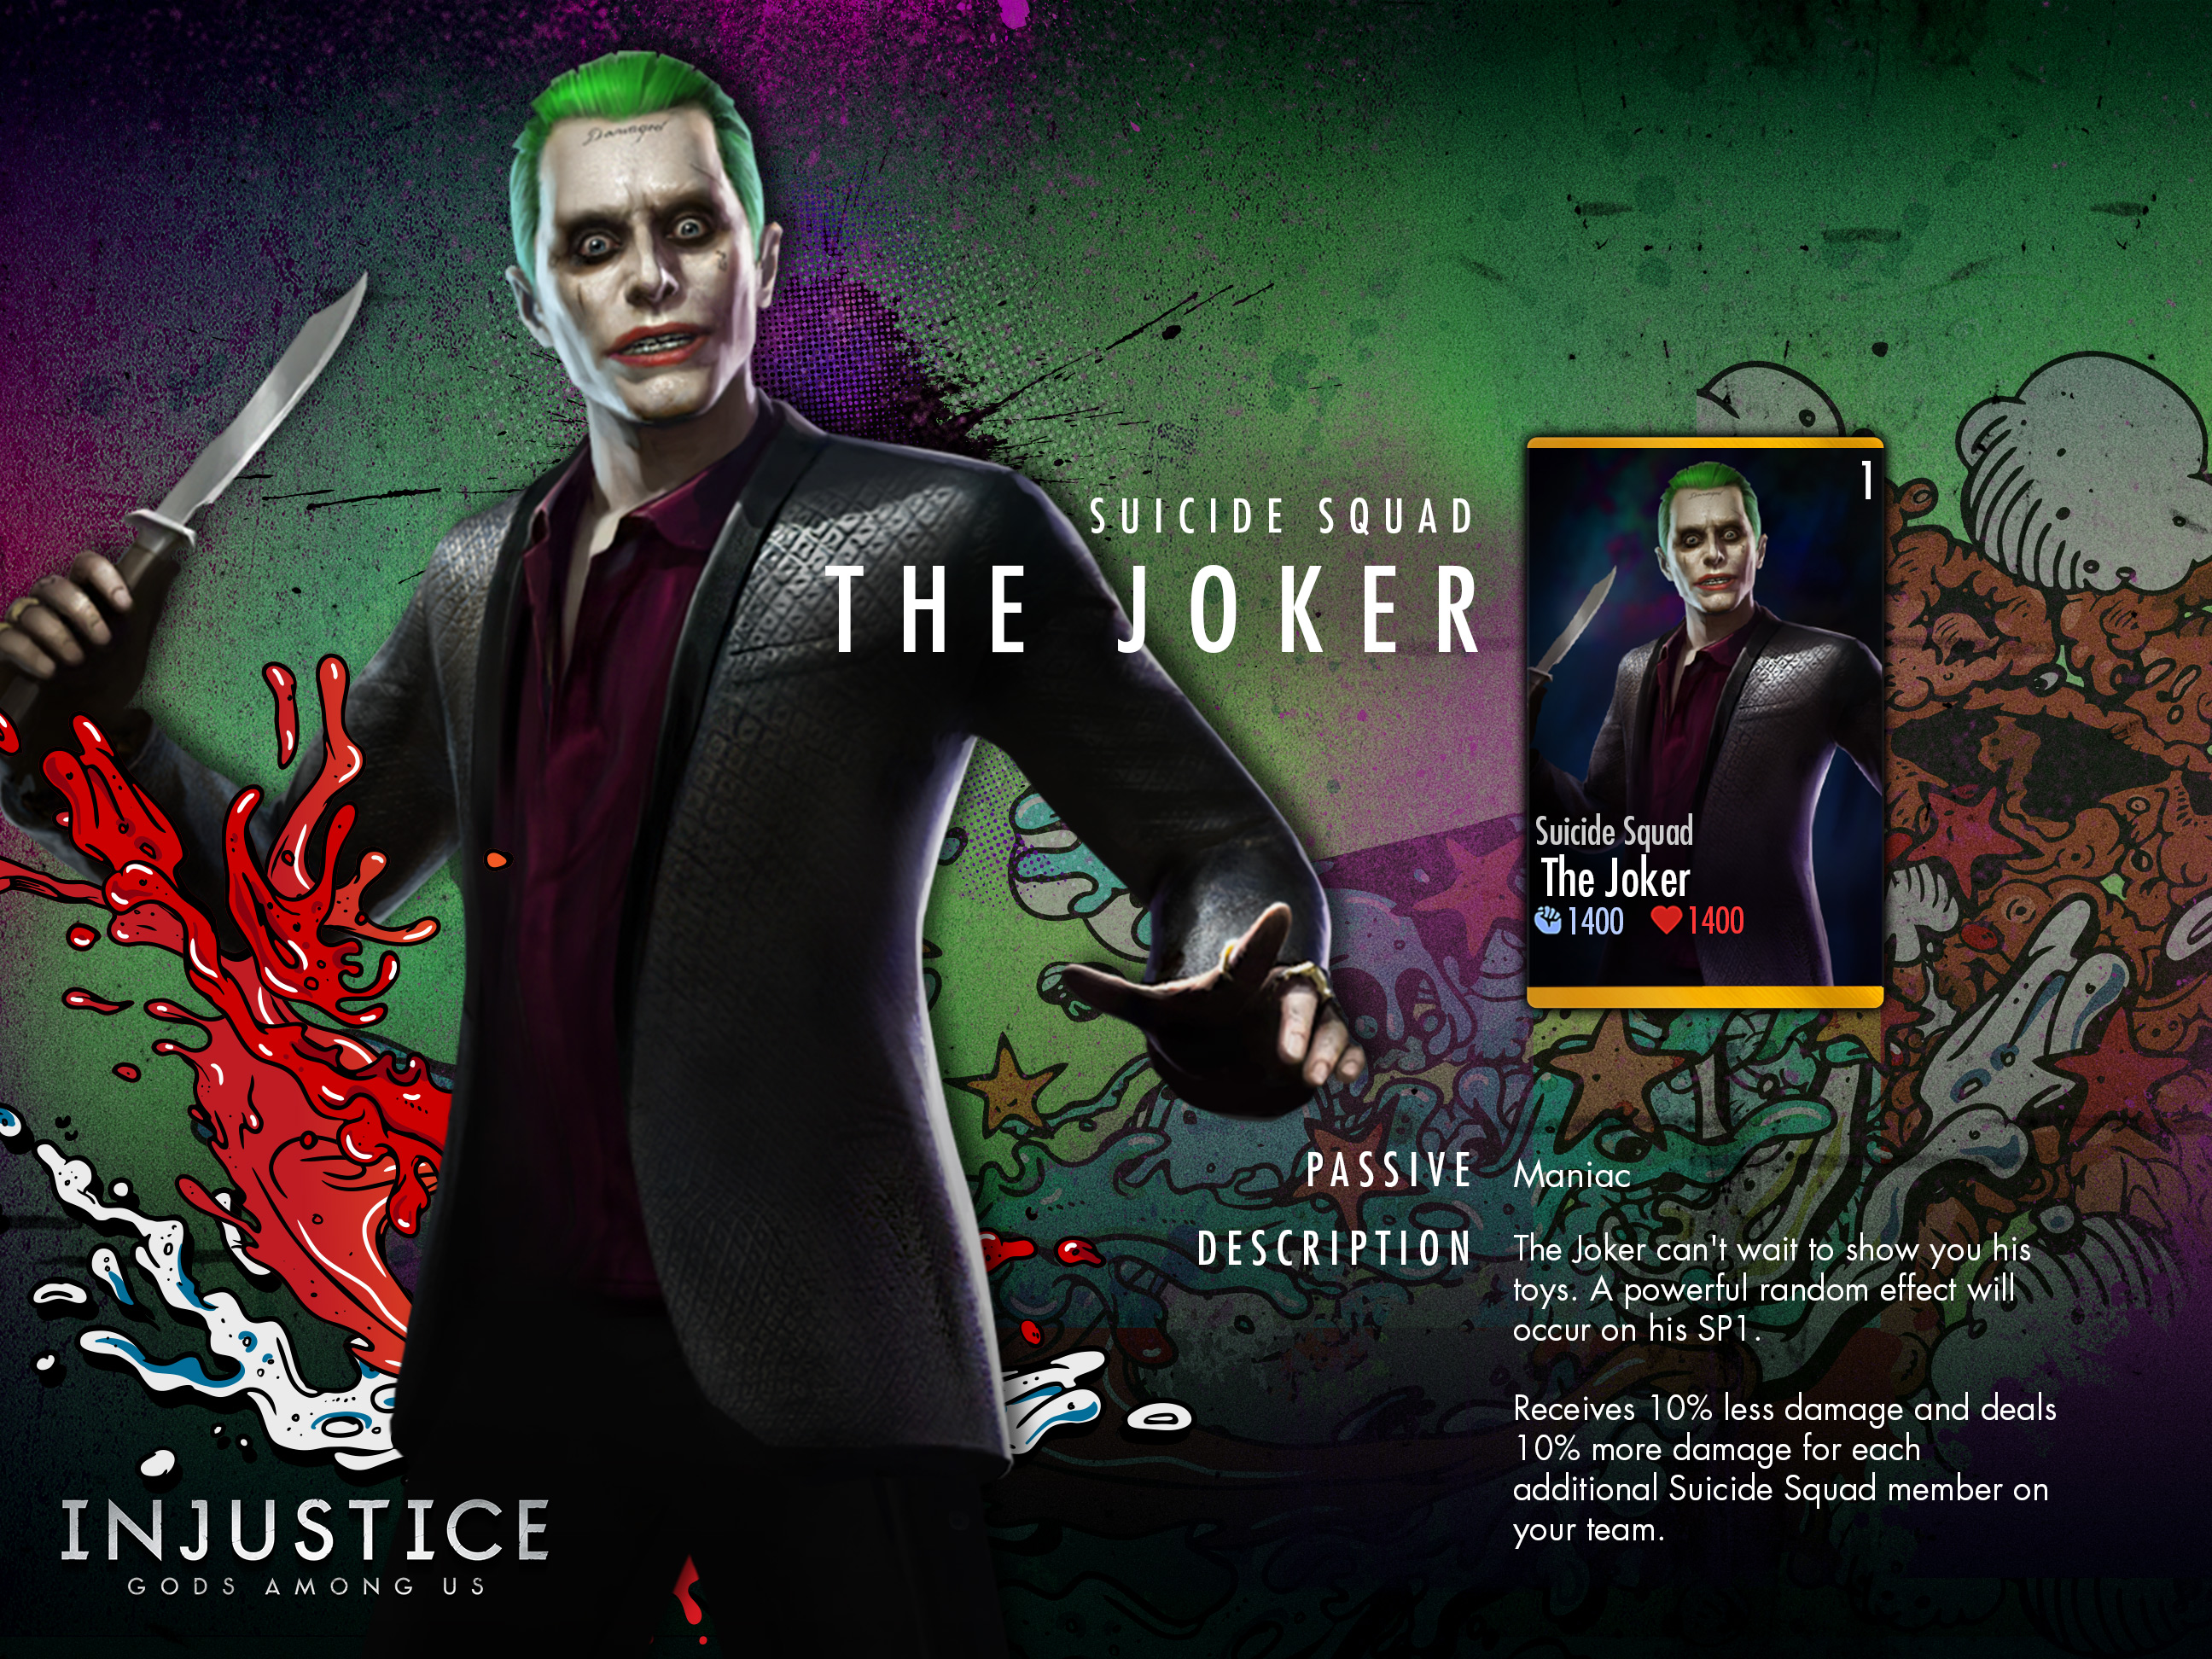 injustice-gods-among-us-mobile-suicide-squad-the-joker-summary.